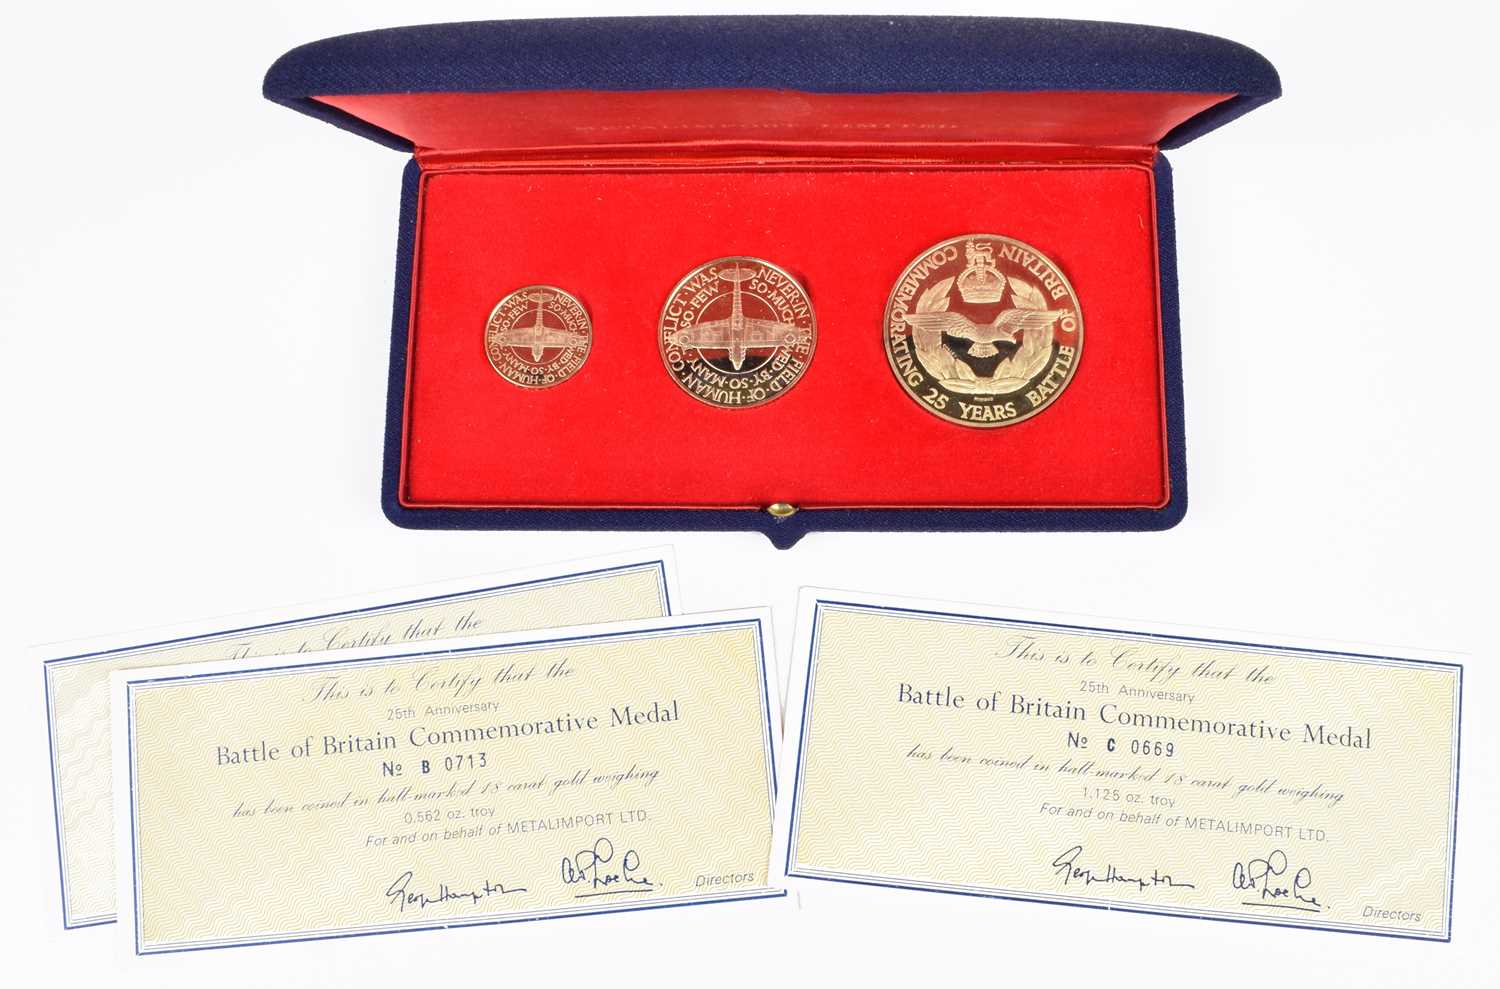 Lot Set of three 18 carat Gold Medals commemorating 25th Anniversary of the Battle of Britain.